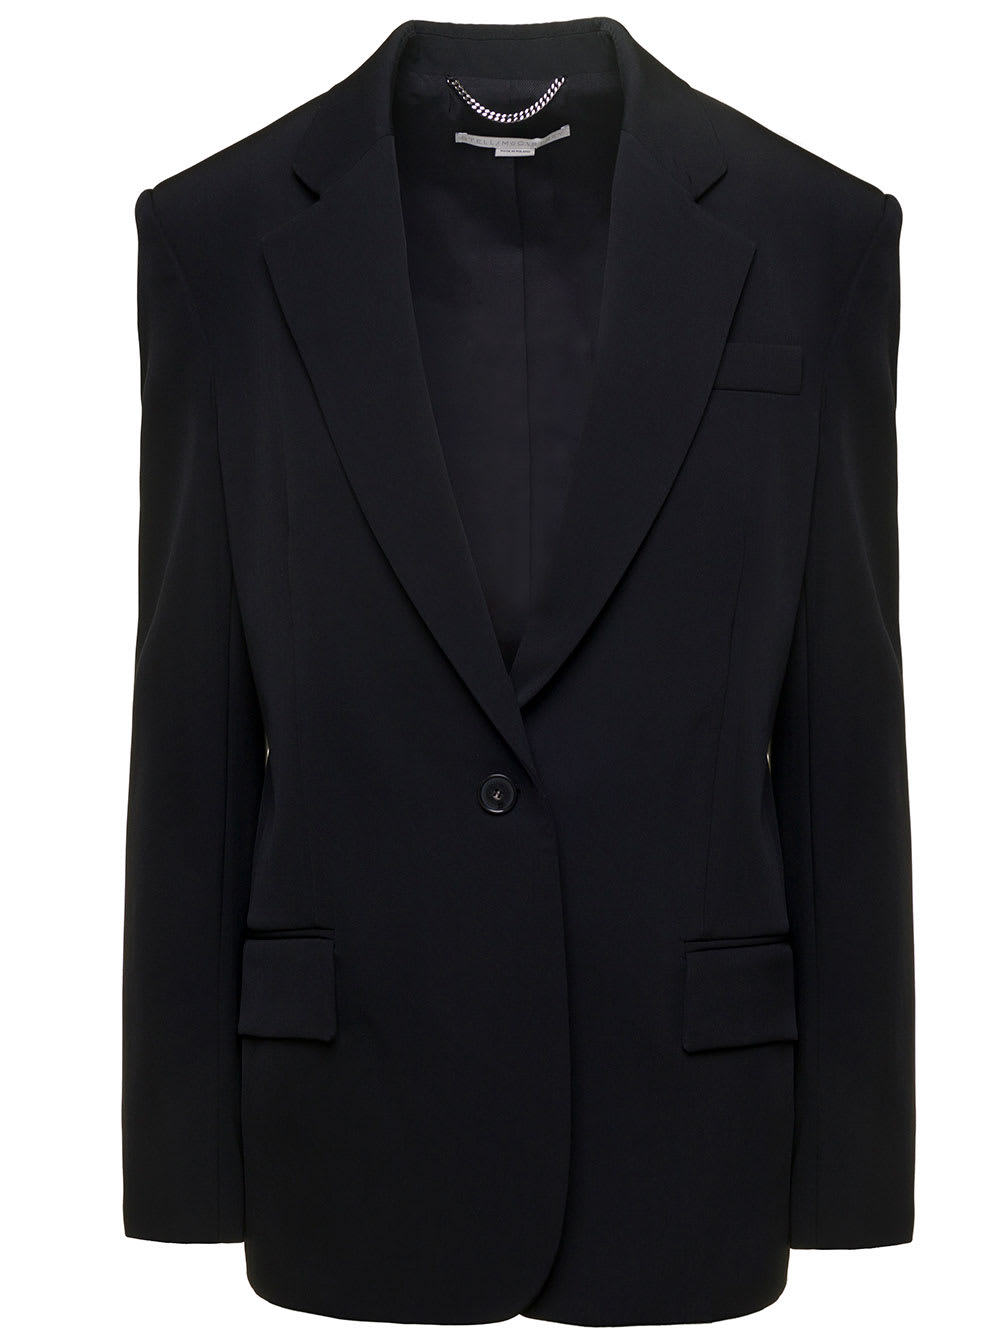 STELLA MCCARTNEY BLACK SINGLE-BREASTED SLIM JACKET WITH NOTCHED REVERS IN STRETCH WOOL WOMAN